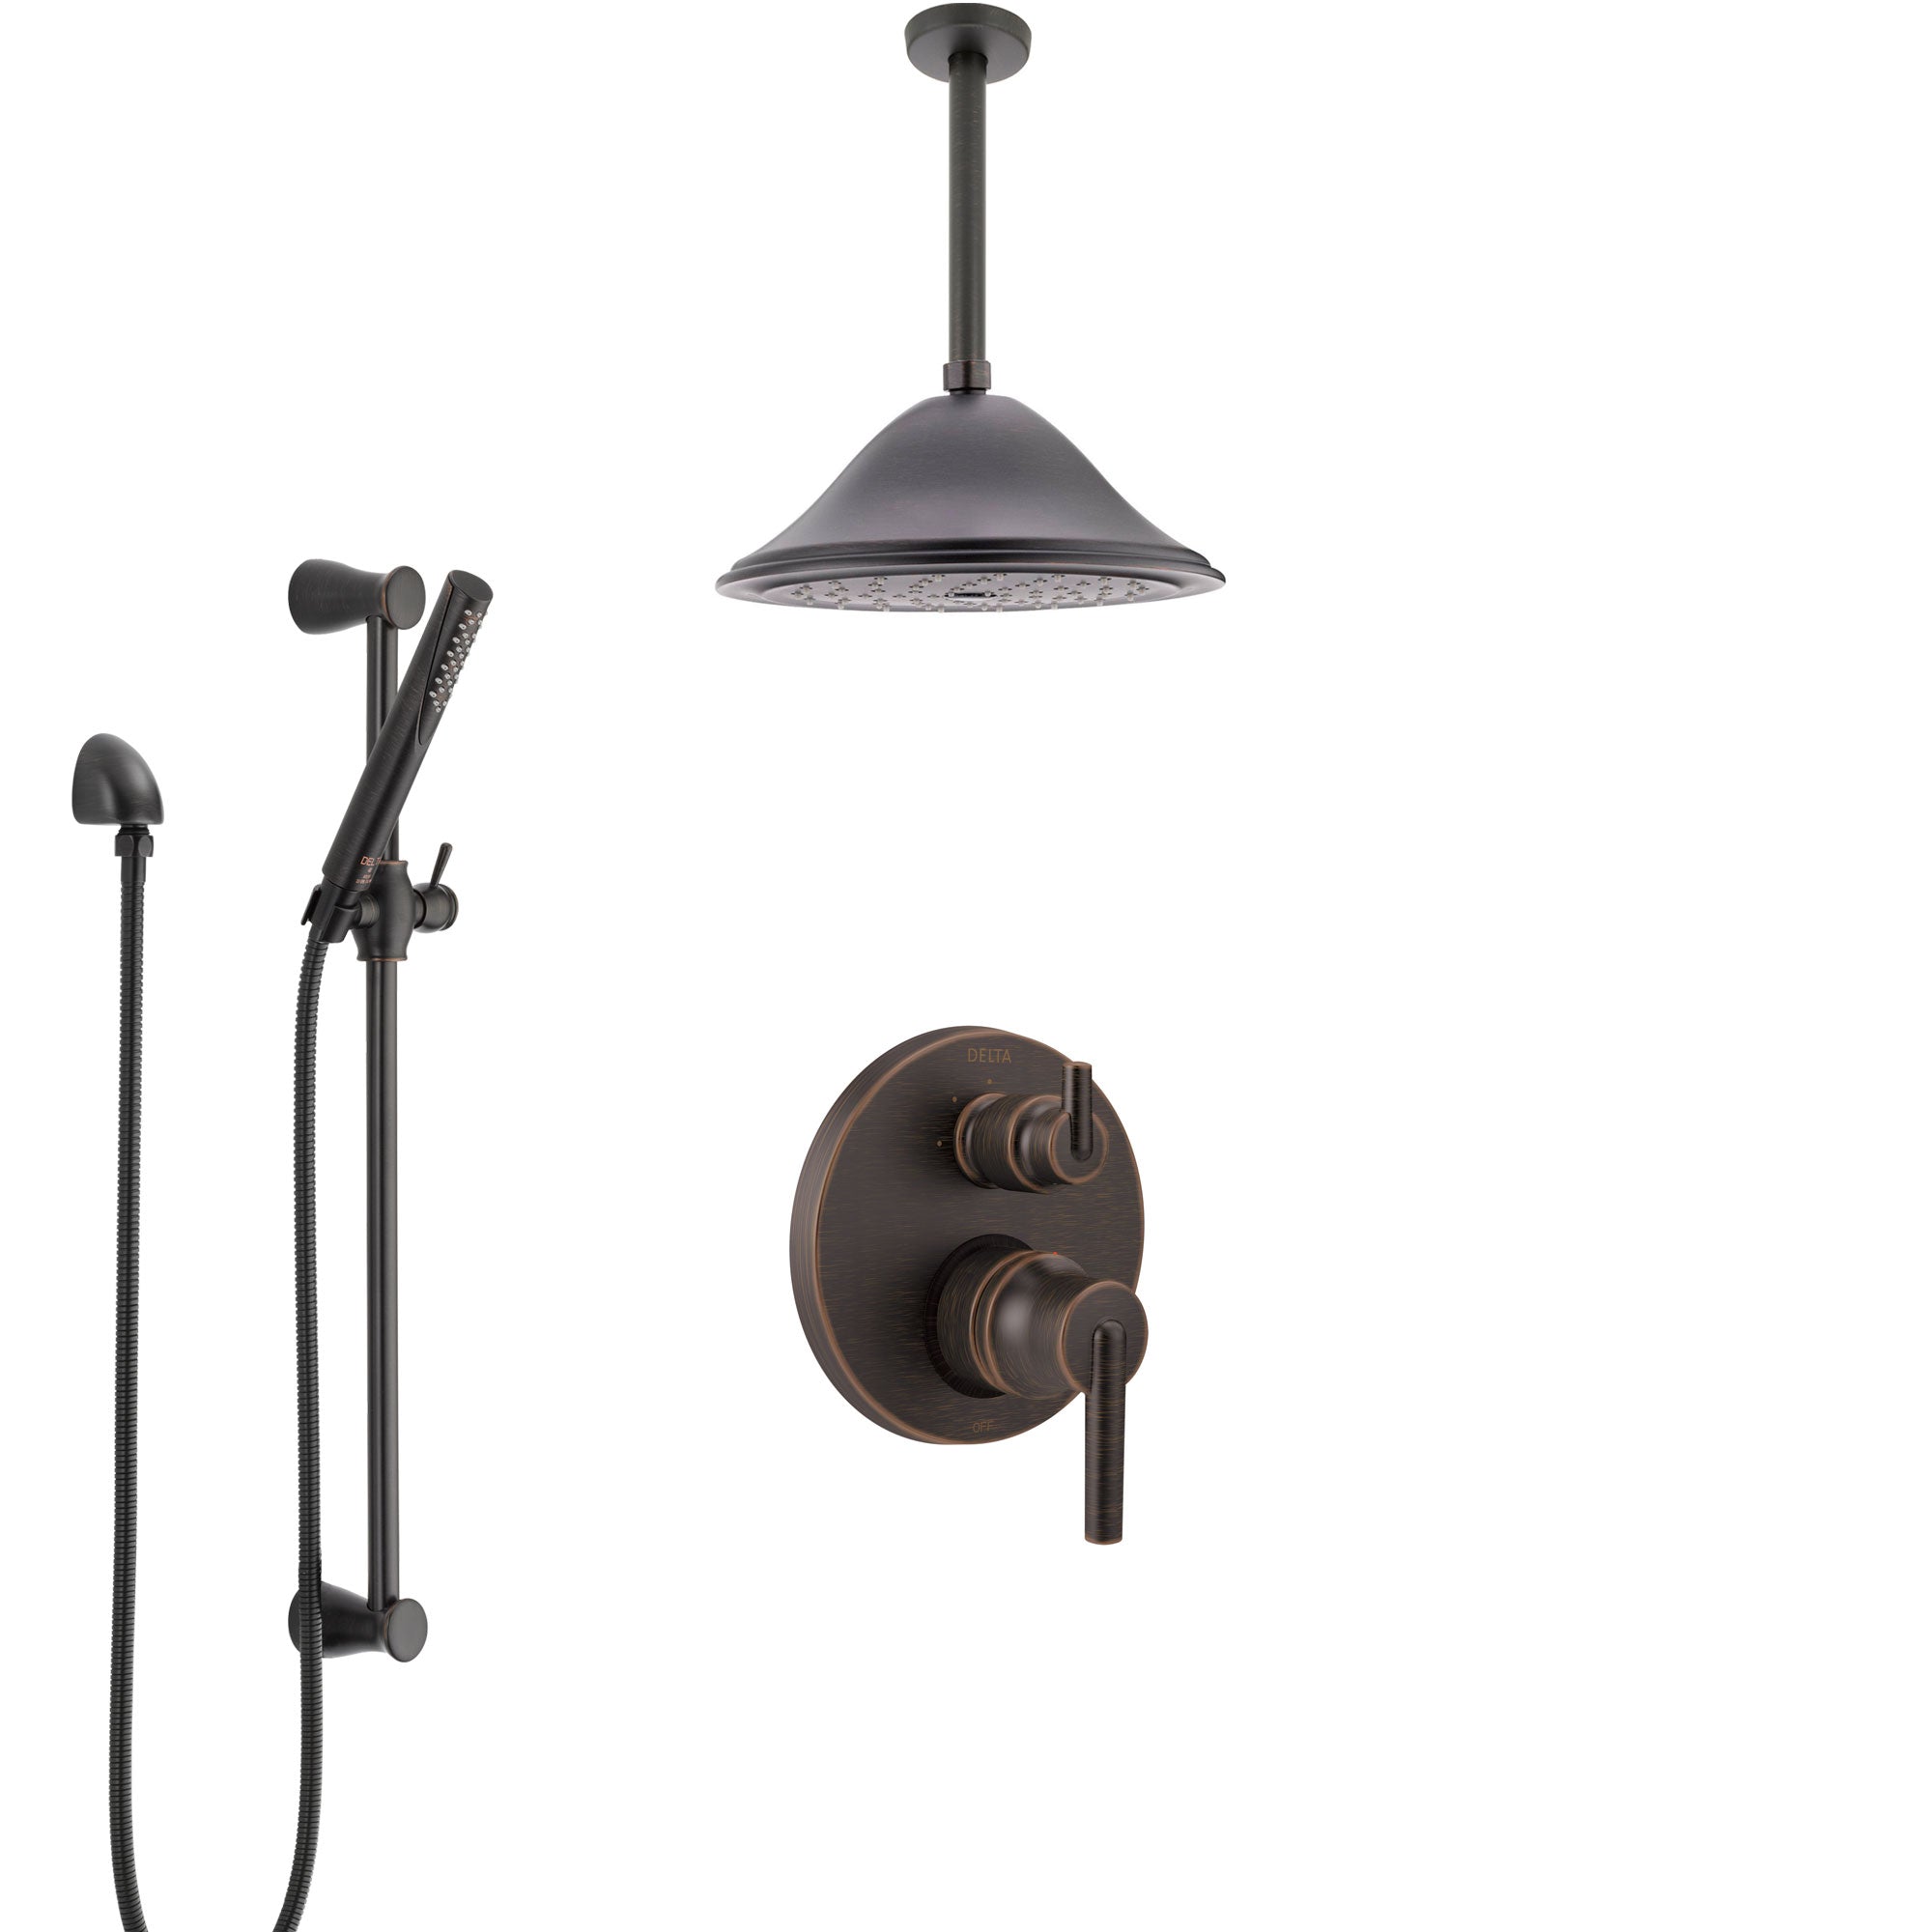 Delta Trinsic Venetian Bronze Shower System with Control Handle, Integrated Diverter, Ceiling Mount Showerhead, and Hand Shower SS24859RB8